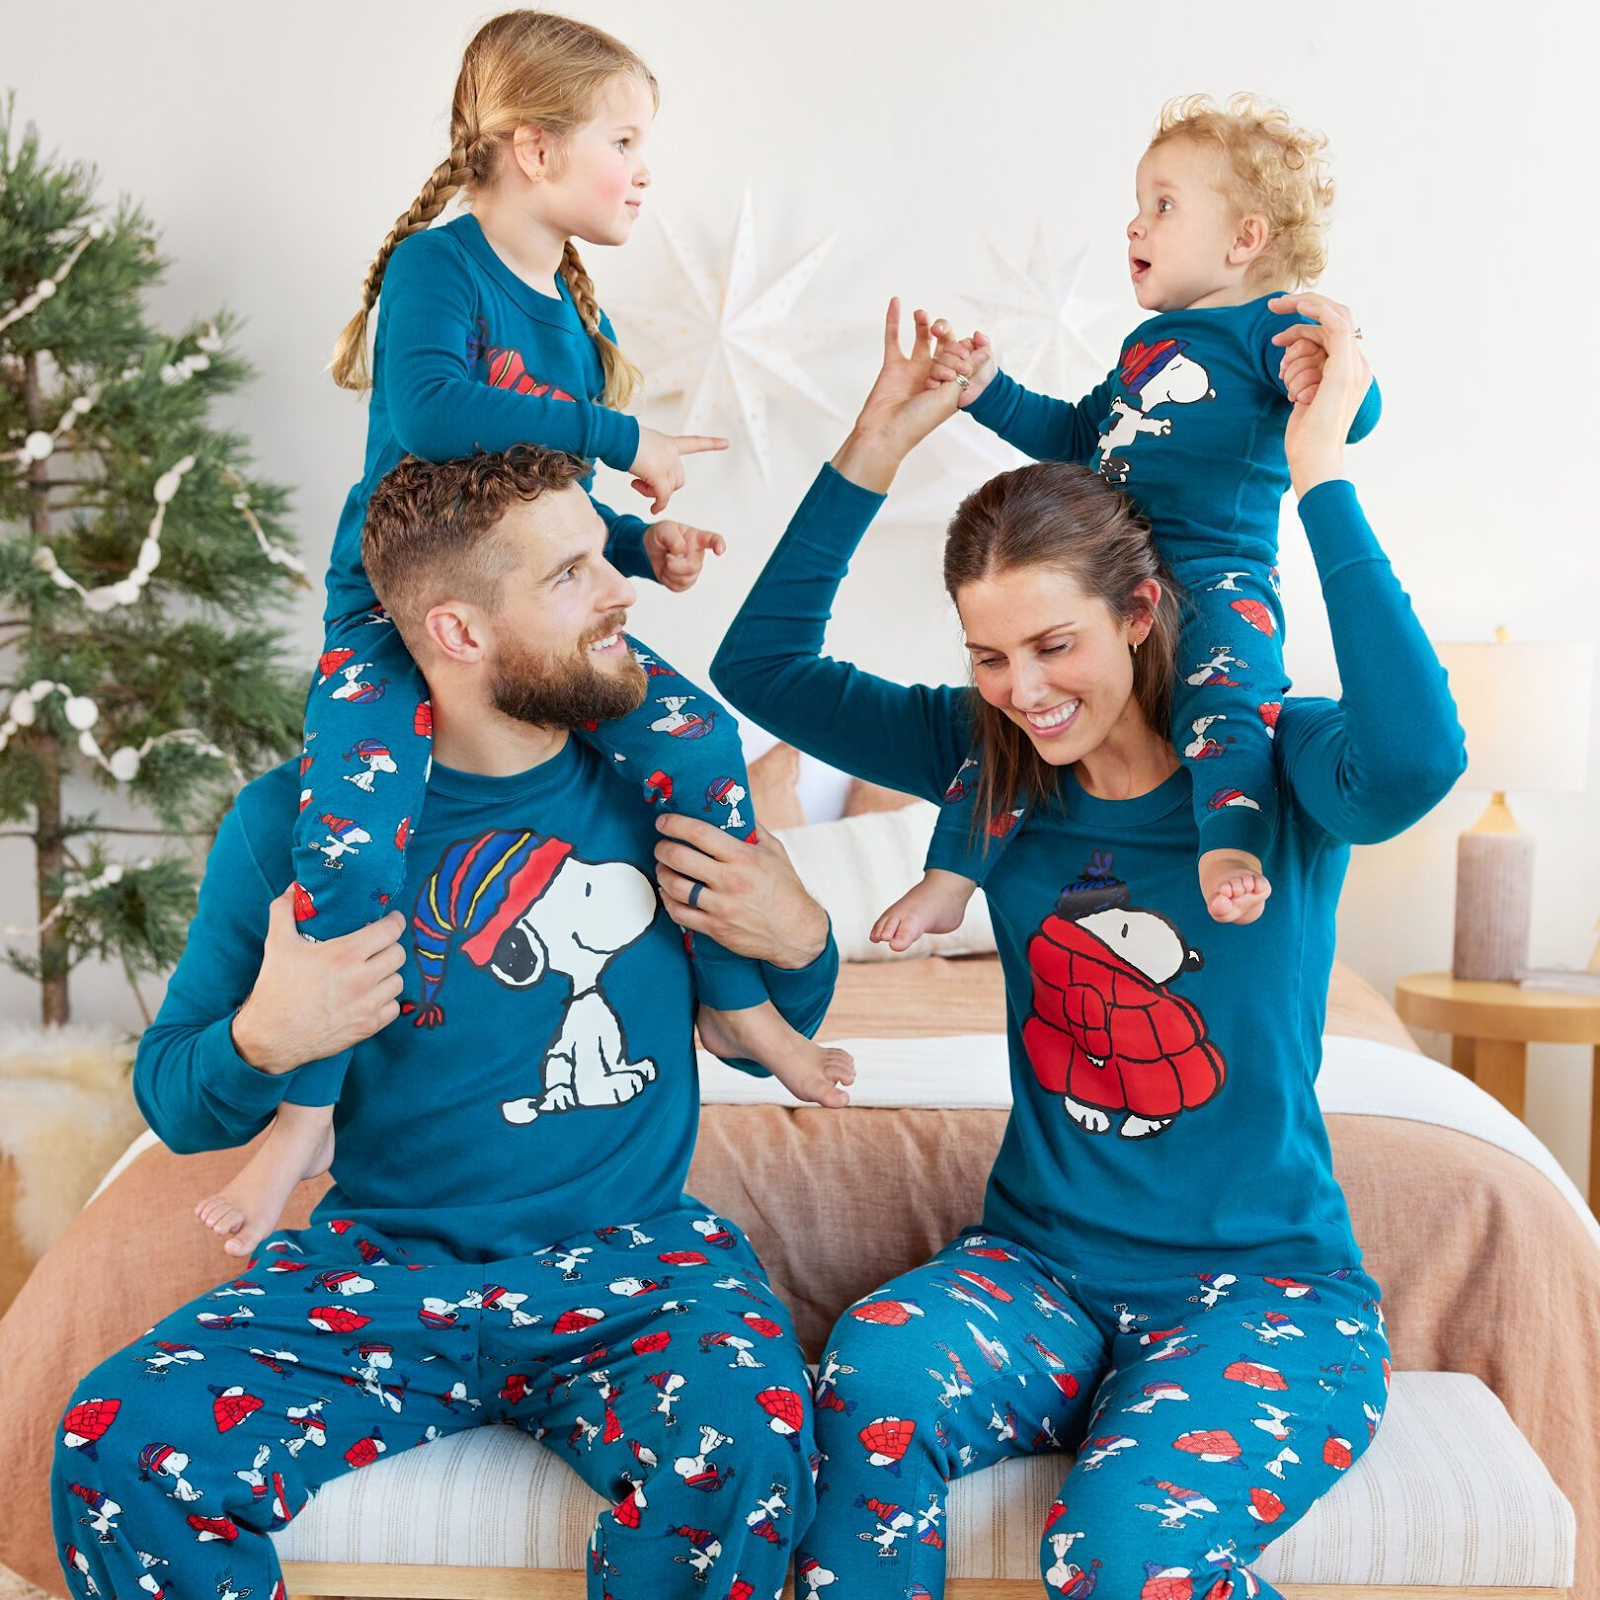 When choosing sizes, consider the fit and comfort, as these pajamas are not just for a single morning but for every chilly evening leading up to the big day